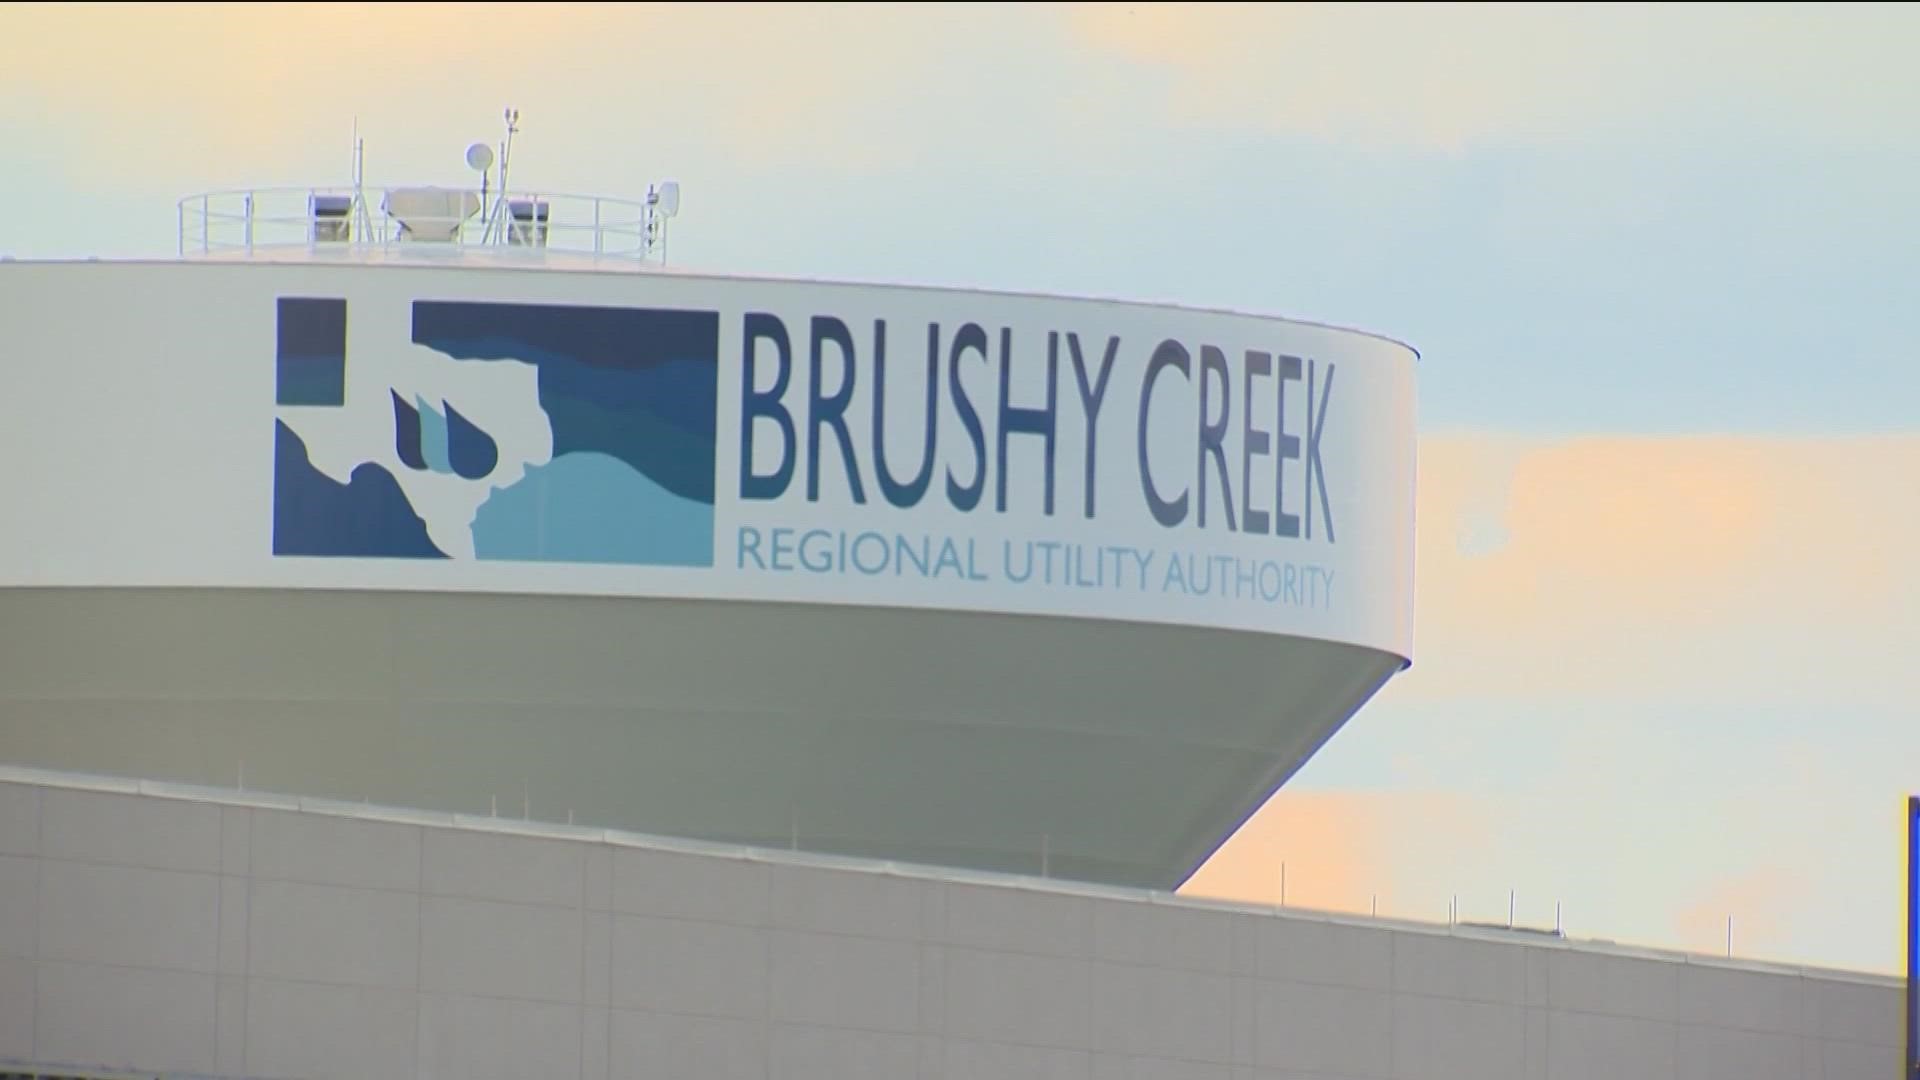 Due to the Brushy Creek Regional Utility Authority water treatment facility needing to repair an intake pipe, the facility is shutting down for repairs.